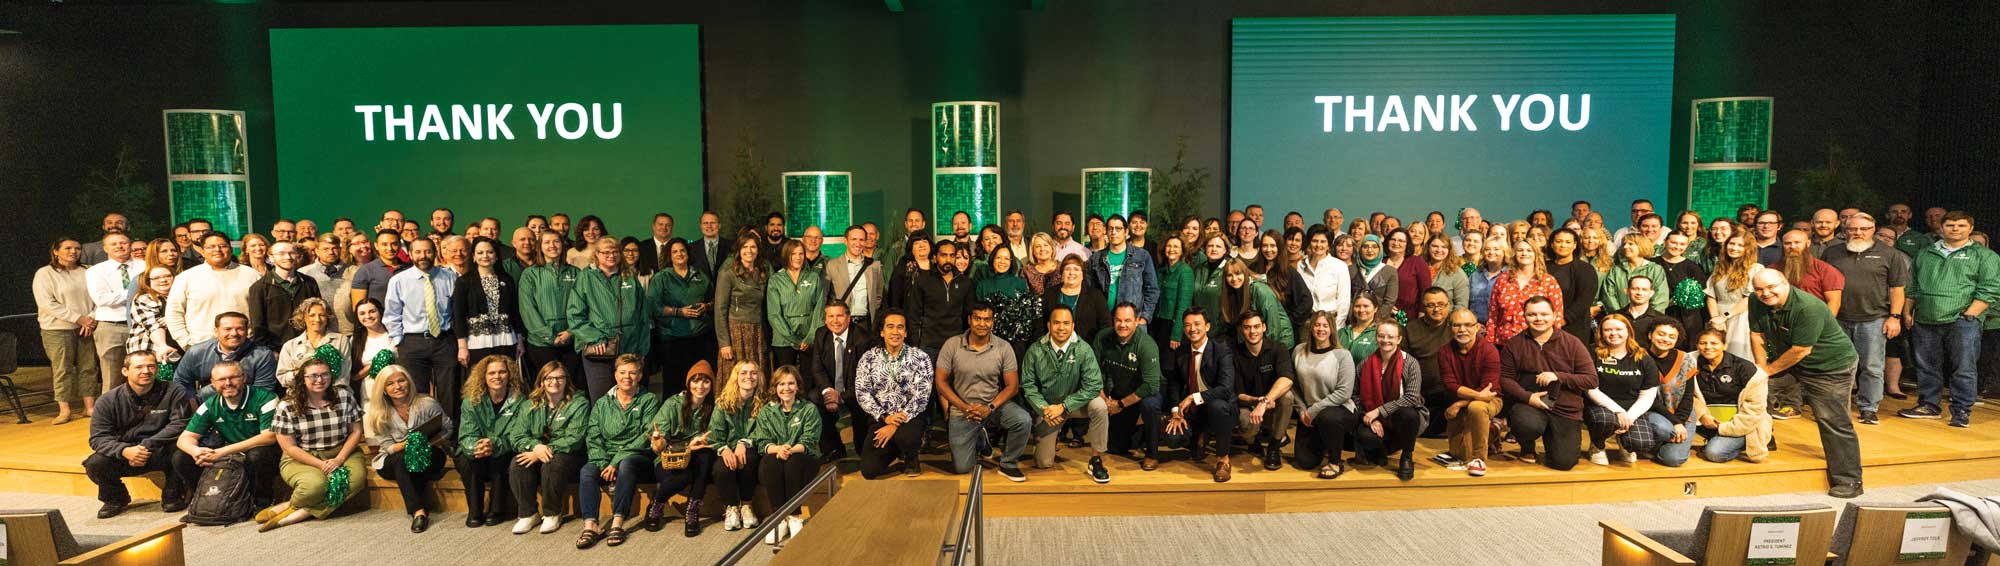 UVU launched EverGREEN with a special kick-off celebration for all faculty and staff, followed by a public announcement at the President’s Scholarship Ball.